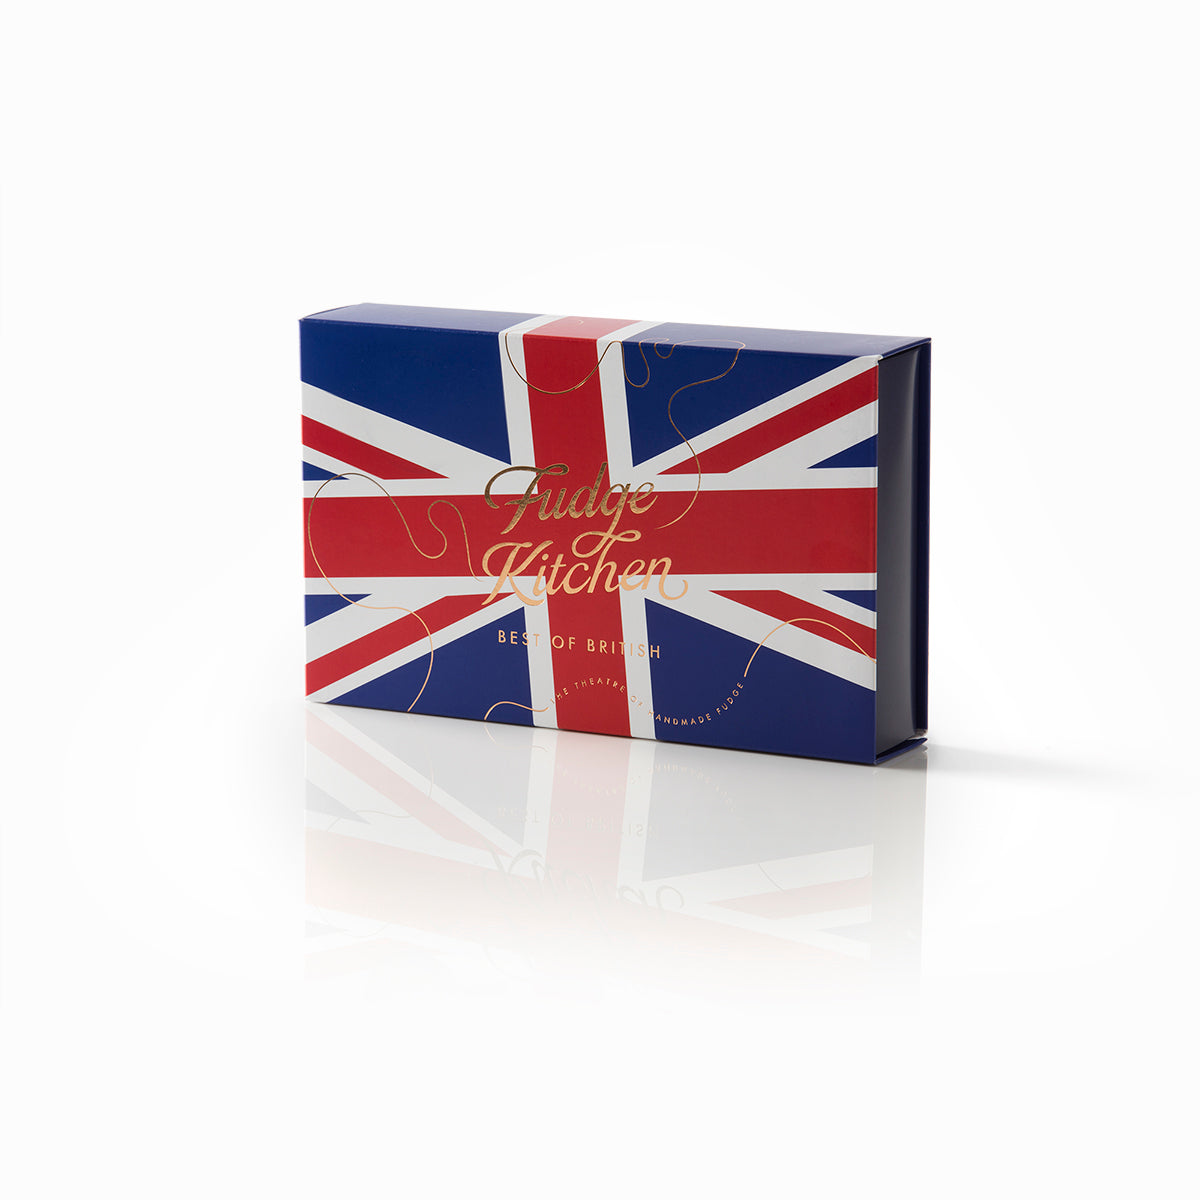 Best of British Selection (case of 10)